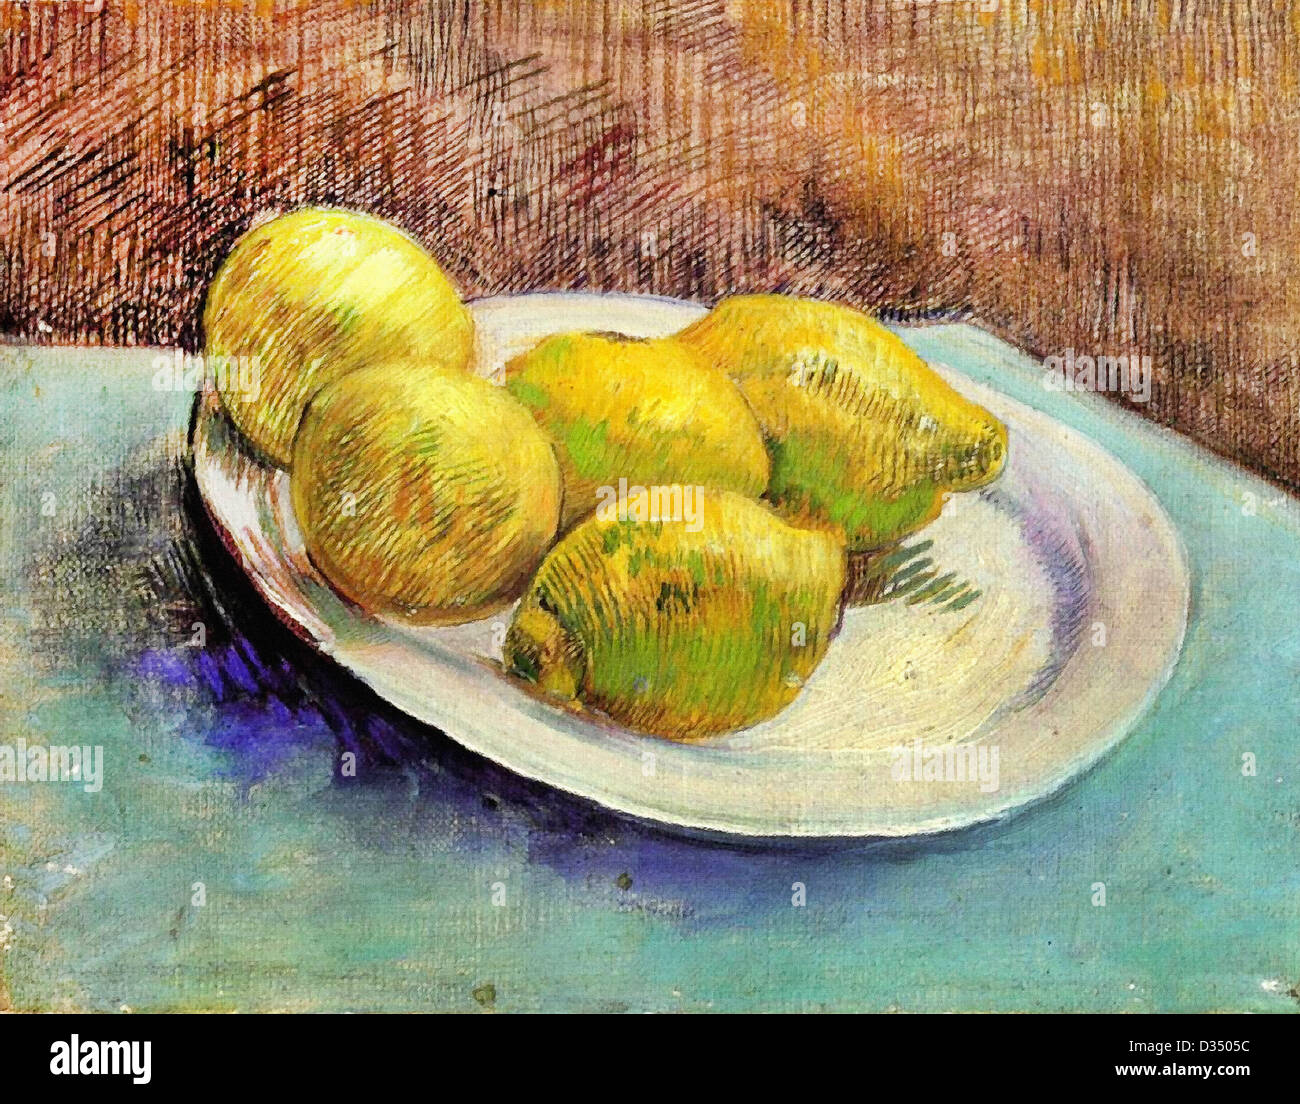 Vincent van Gogh, Still Life with Lemons on a Plate. 1887. Post-Impressionism. Oil on canvas. Van Gogh Museum, Amsterdam Stock Photo